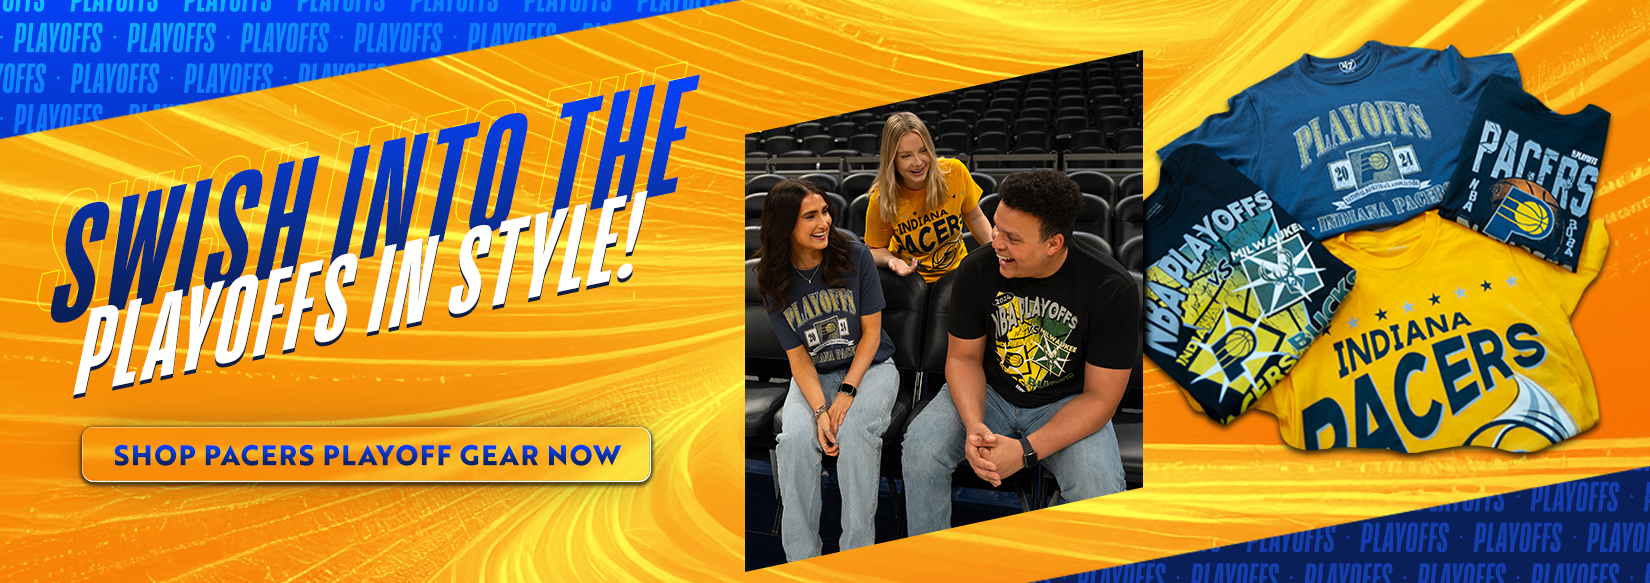 Swish Into The Playoffs In Style! SHOP PACERS PLAYOFF GEAR NOW